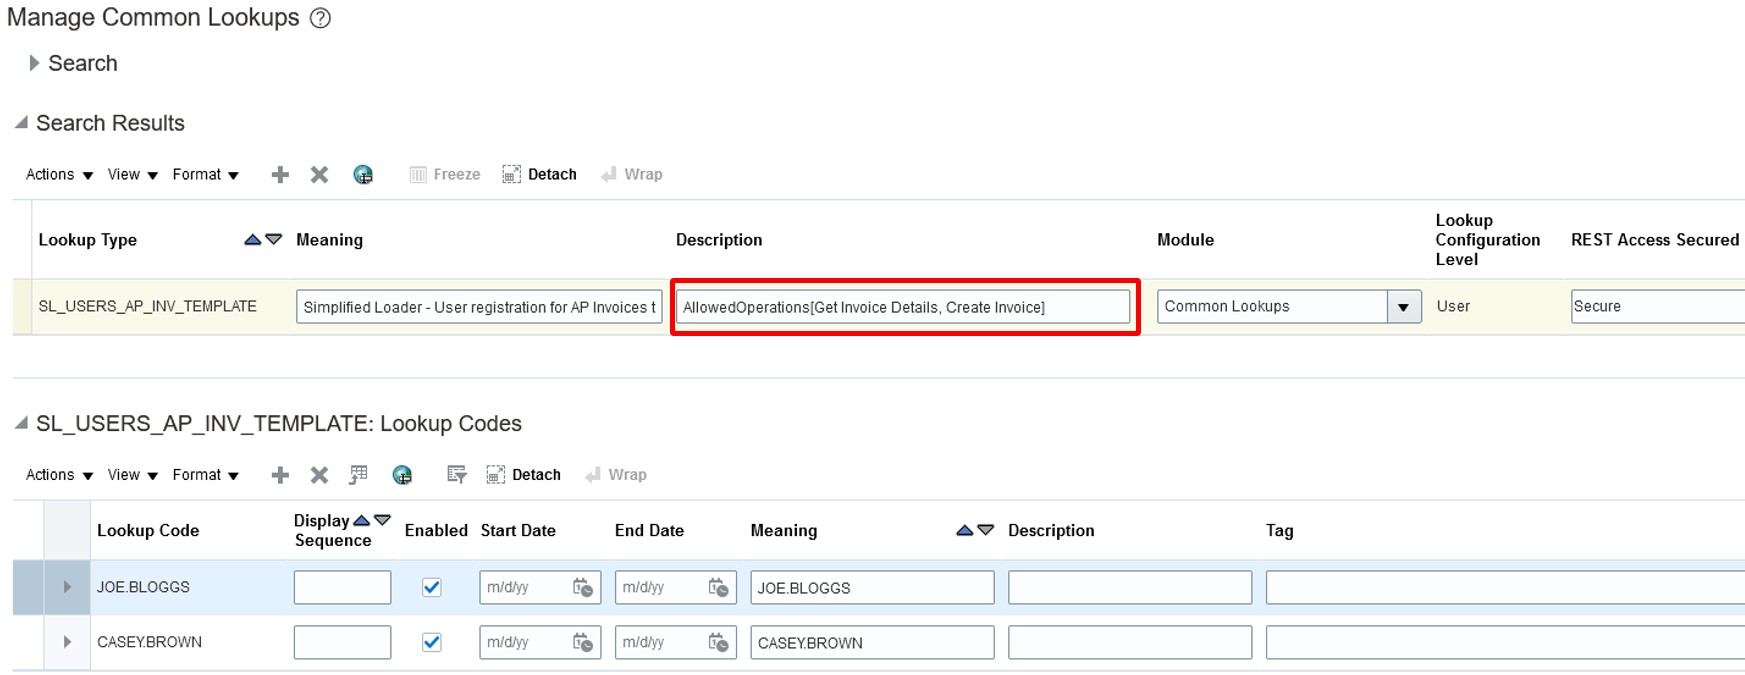 Allowed Operations - Simplified Loader Excel for Oracle Fusion Cloud ERP